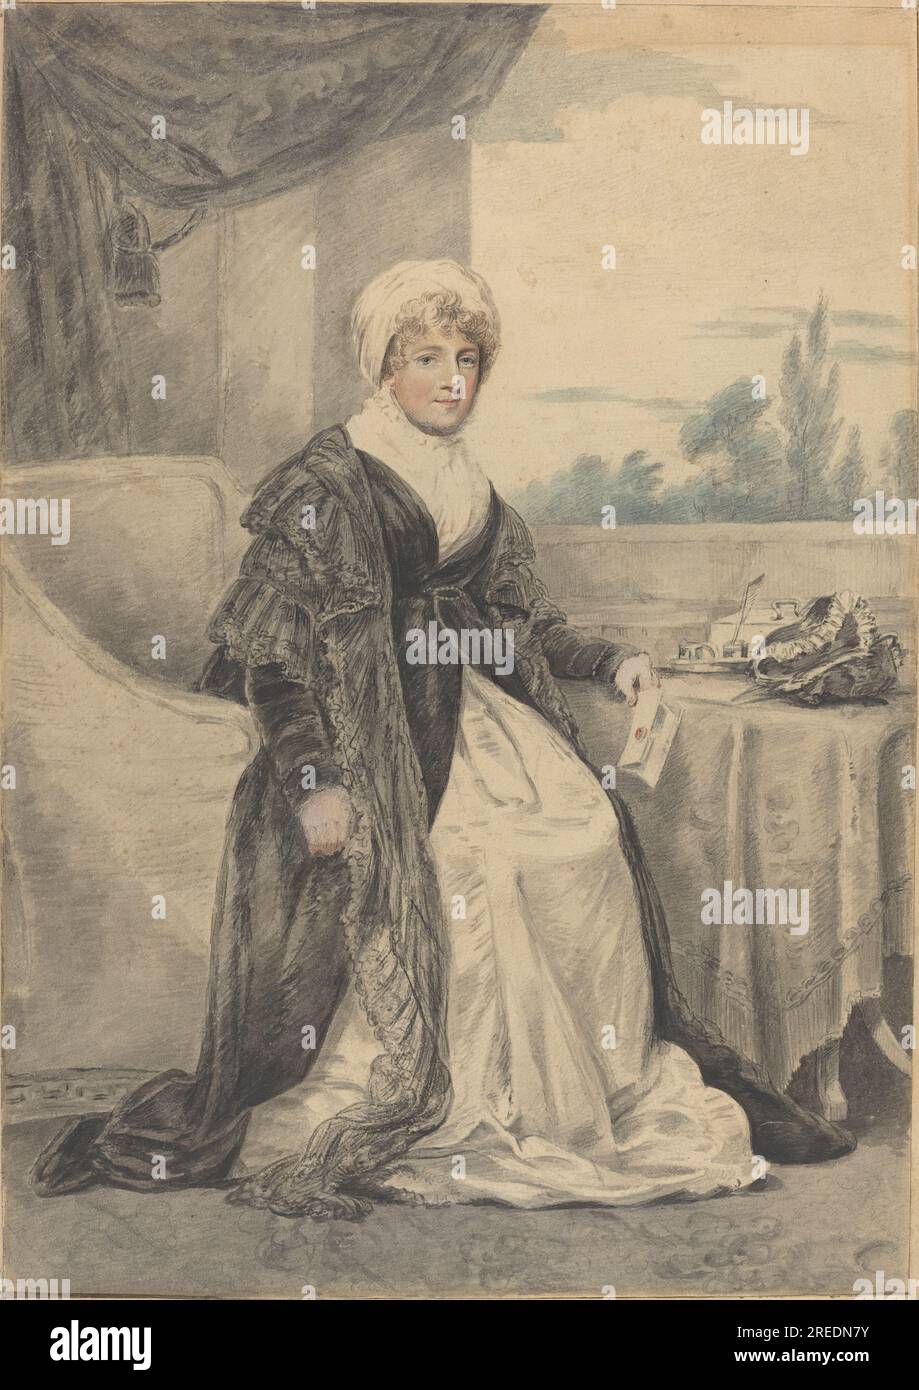 'Henry Edridge, Woman Seated at a Table, Holding a Letter, 0, watercolor over graphite, Overall (approximate): 34.3 x 24.2 cm (13 1/2 x 9 1/2 in.) support: 40.5 x 30.2 cm (15 15/16 x 11 7/8 in.), Ailsa Mellon Bruce Collection, 1970.17.150' Stock Photo